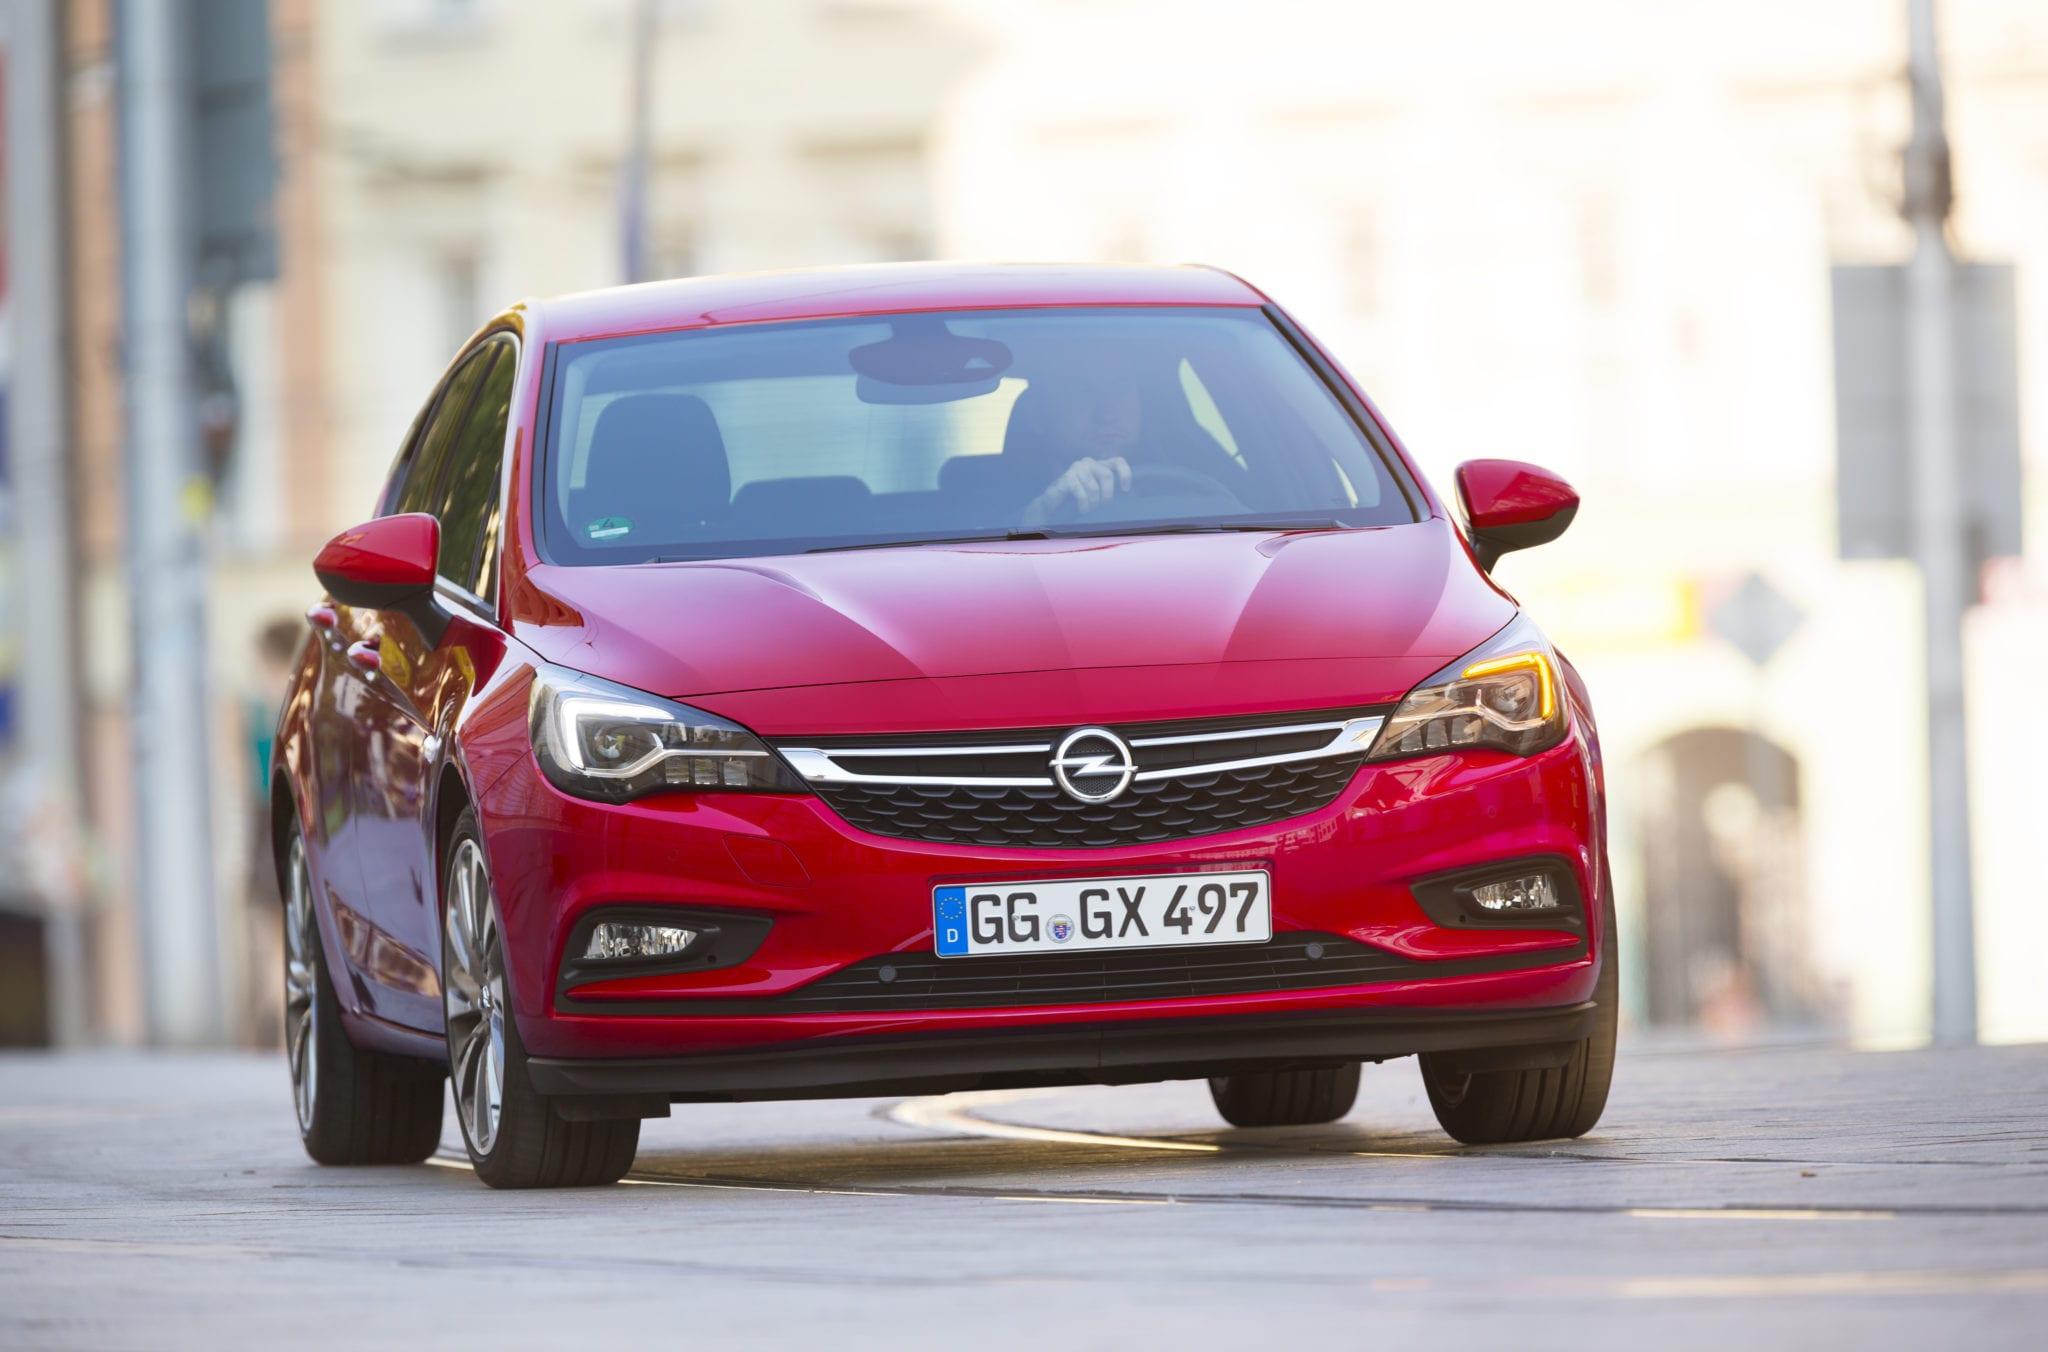 Opel Astra 1.6 Diesel 136 PS specs, lap times, performance data ...